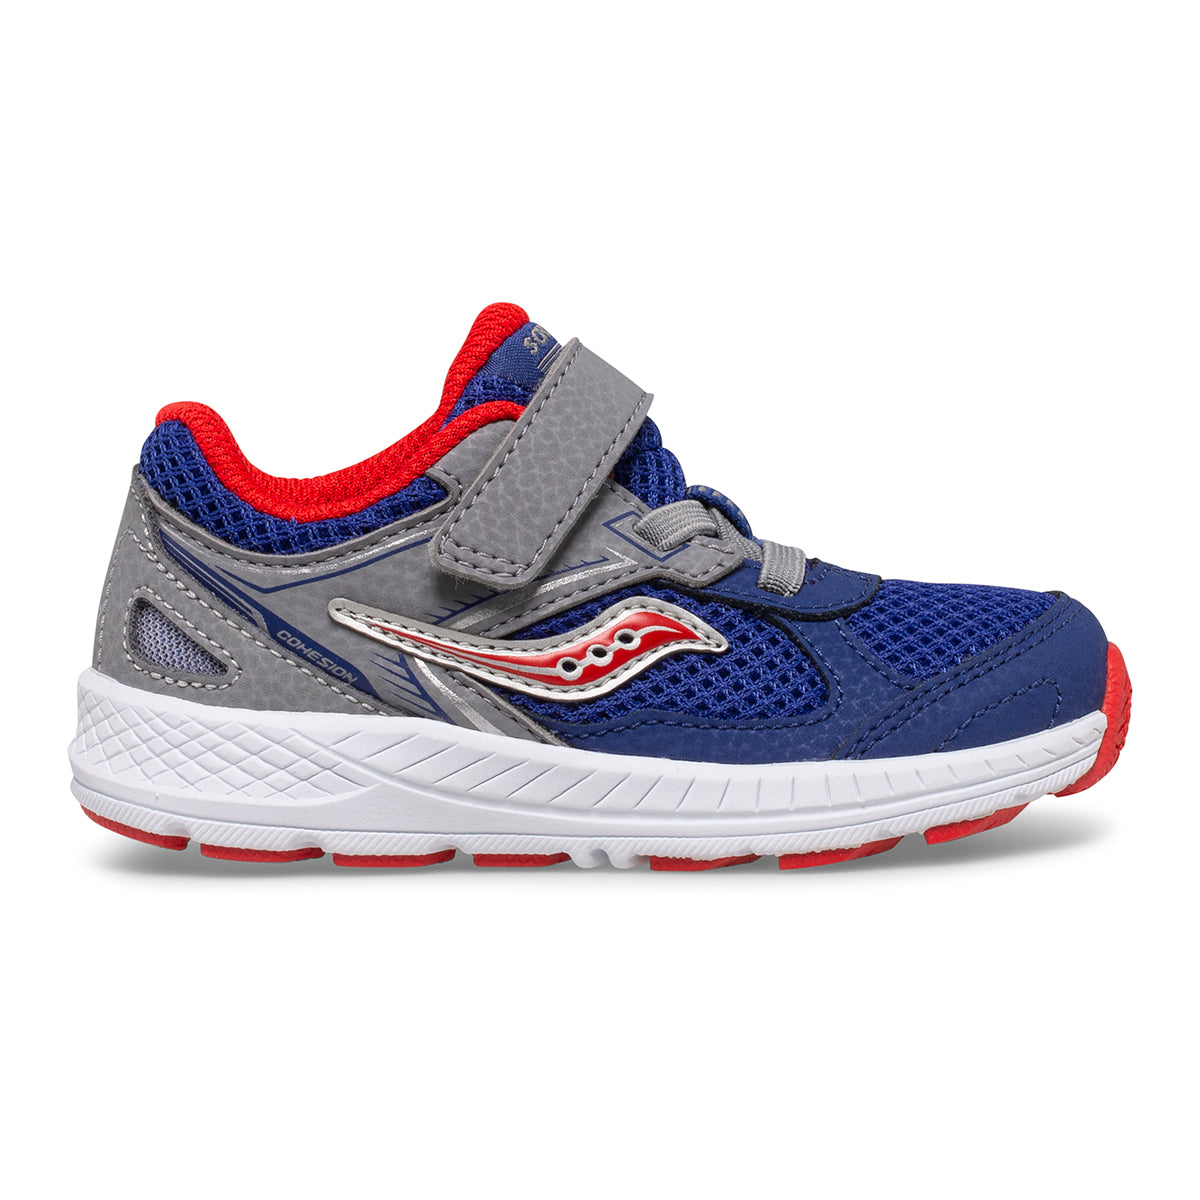 cohesion-14-ac-jr-sneaker-littlekid-navy-red__Navy/Red_3